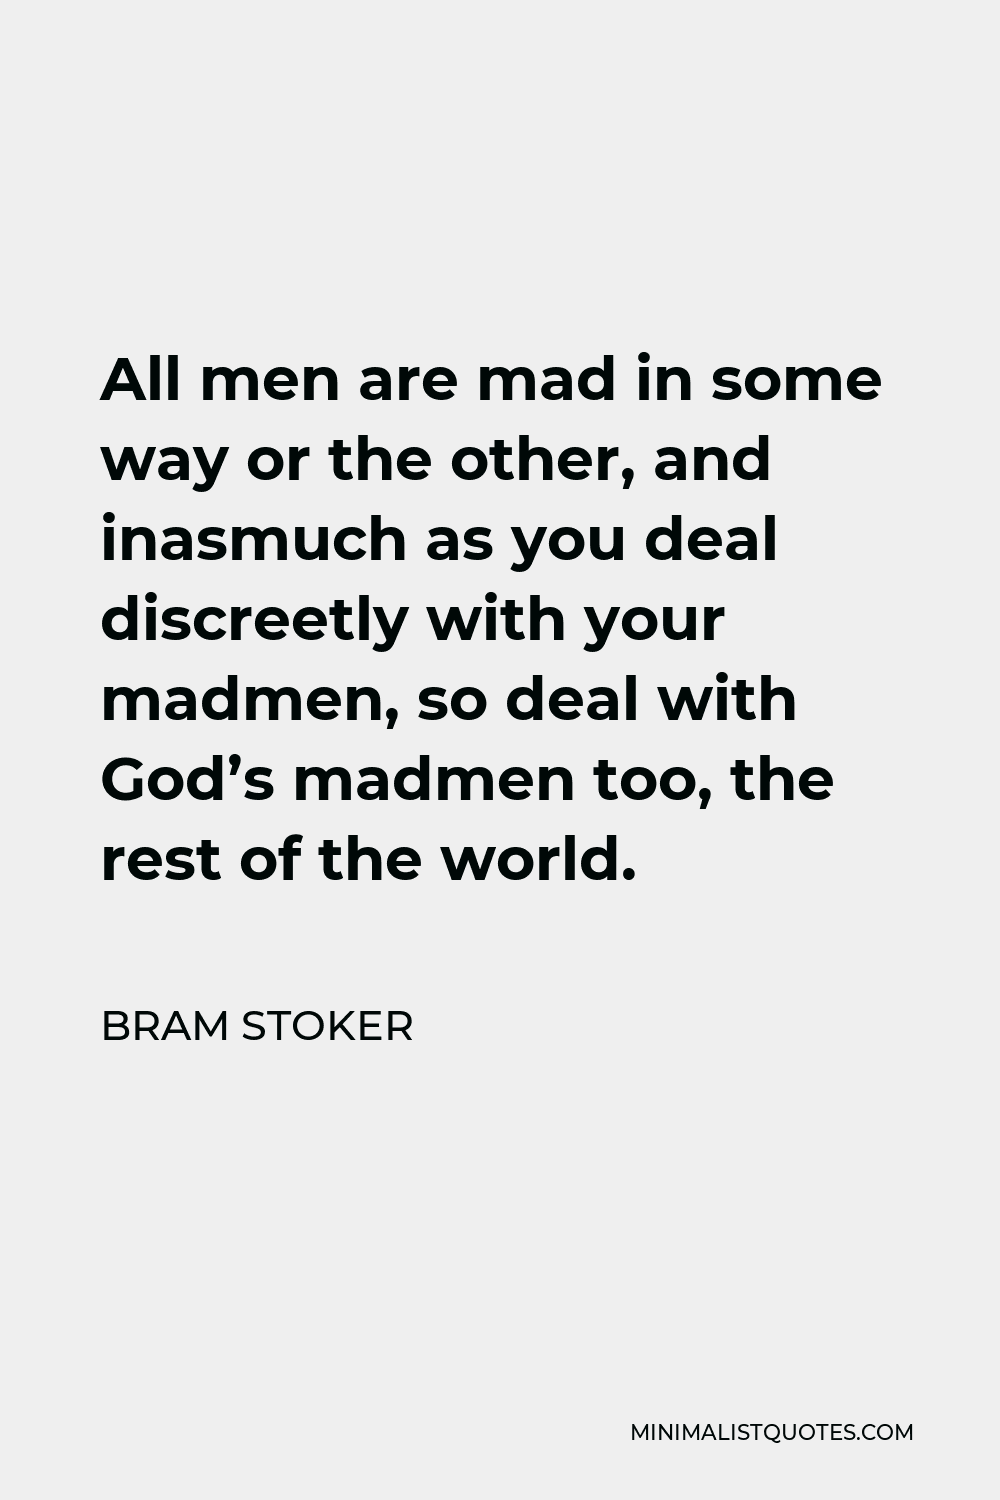 Bram Stoker Quote - All men are mad in some way or the other, and inasmuch as you deal discreetly with your madmen, so deal with God’s madmen too, the rest of the world.